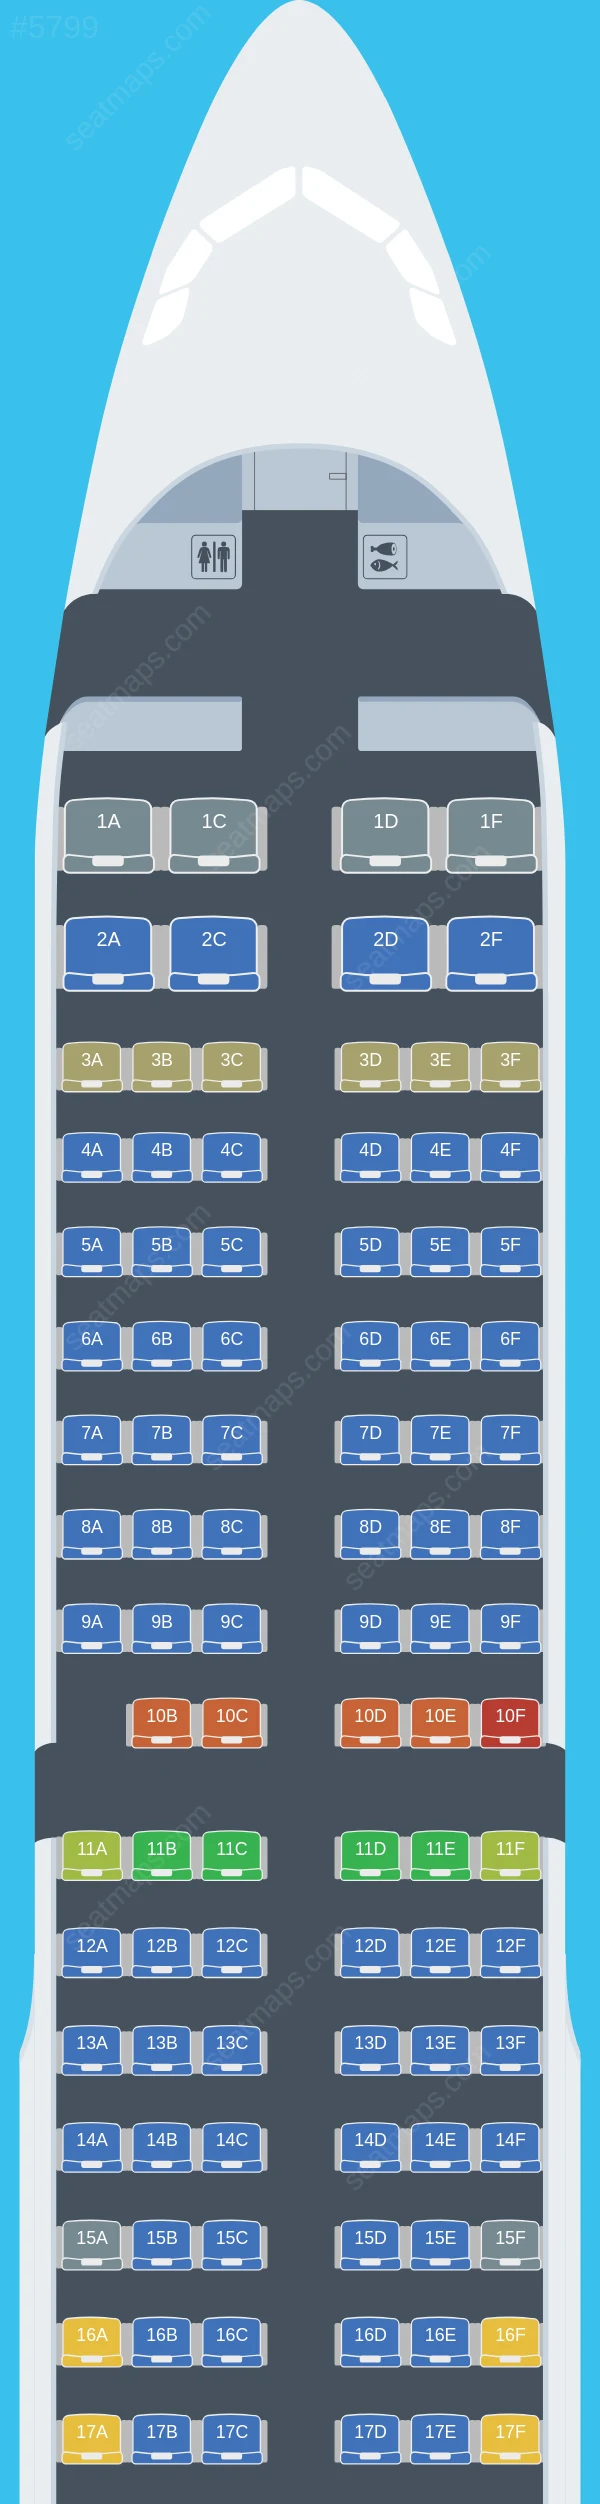 Spirit Airlines Airbus A321-200 seatmap preview